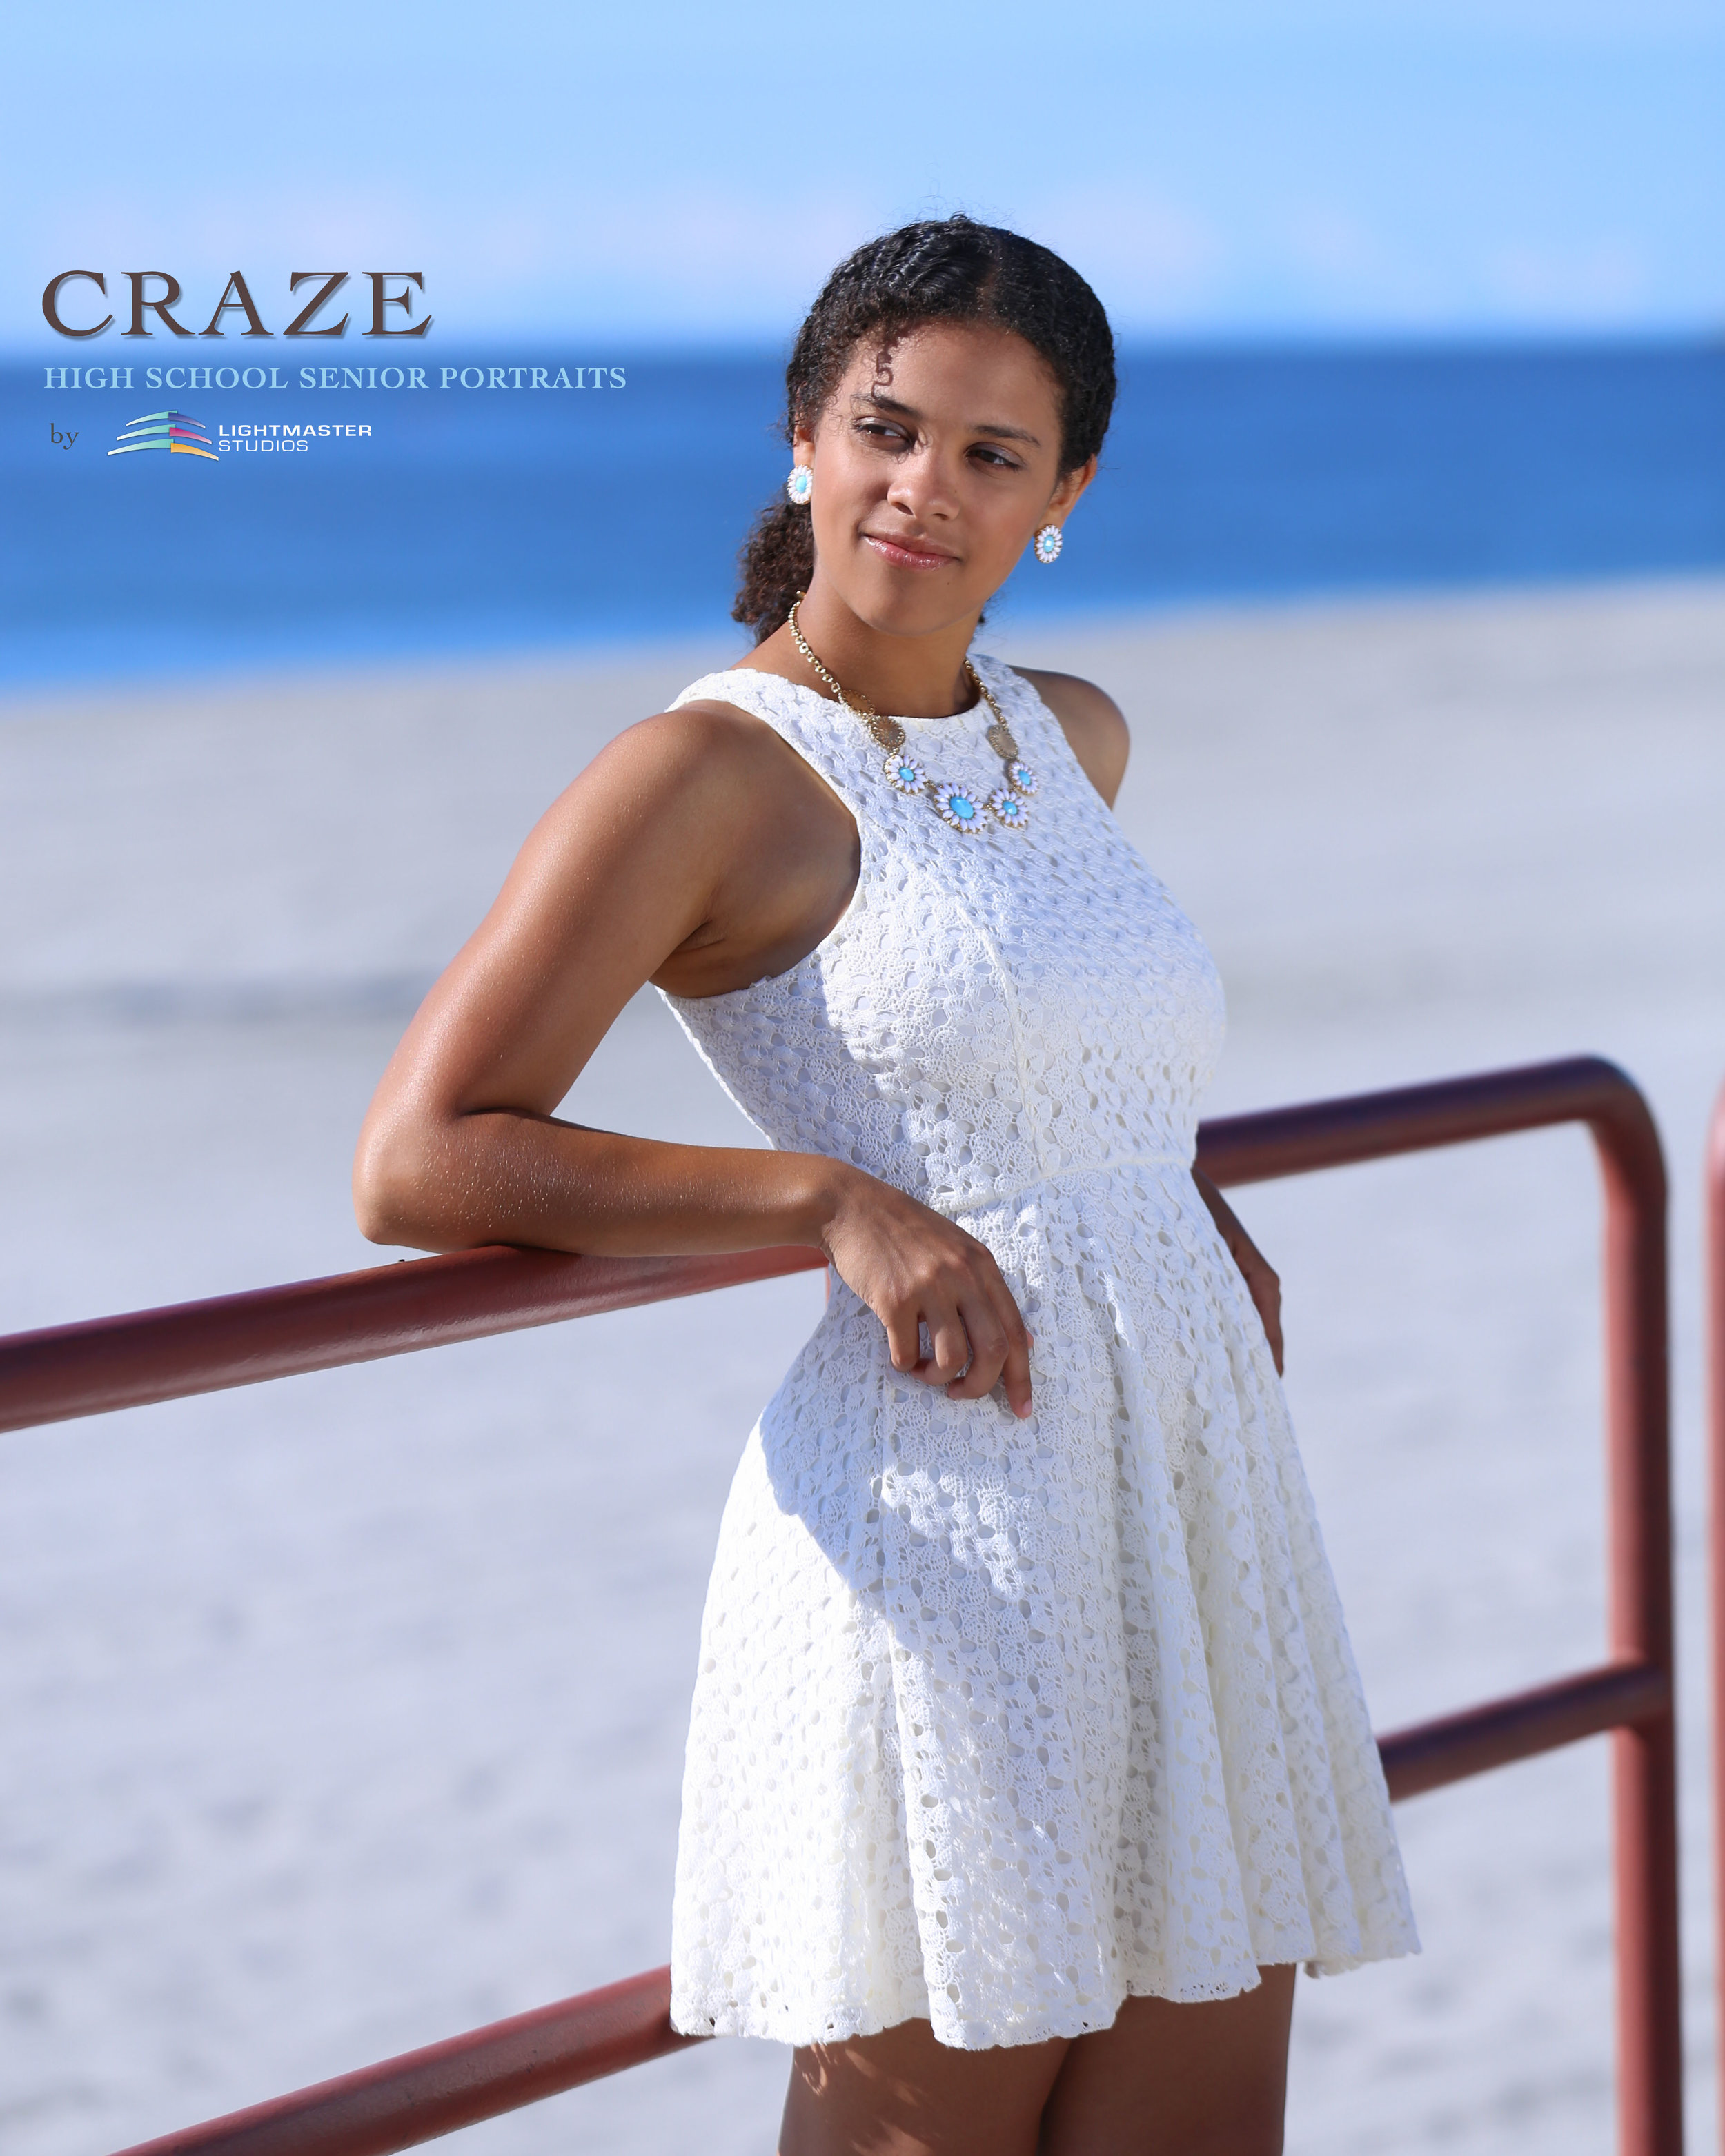 CRAZE Senior Portrait - We see your beauty, and we show it to the world!&nbsp;